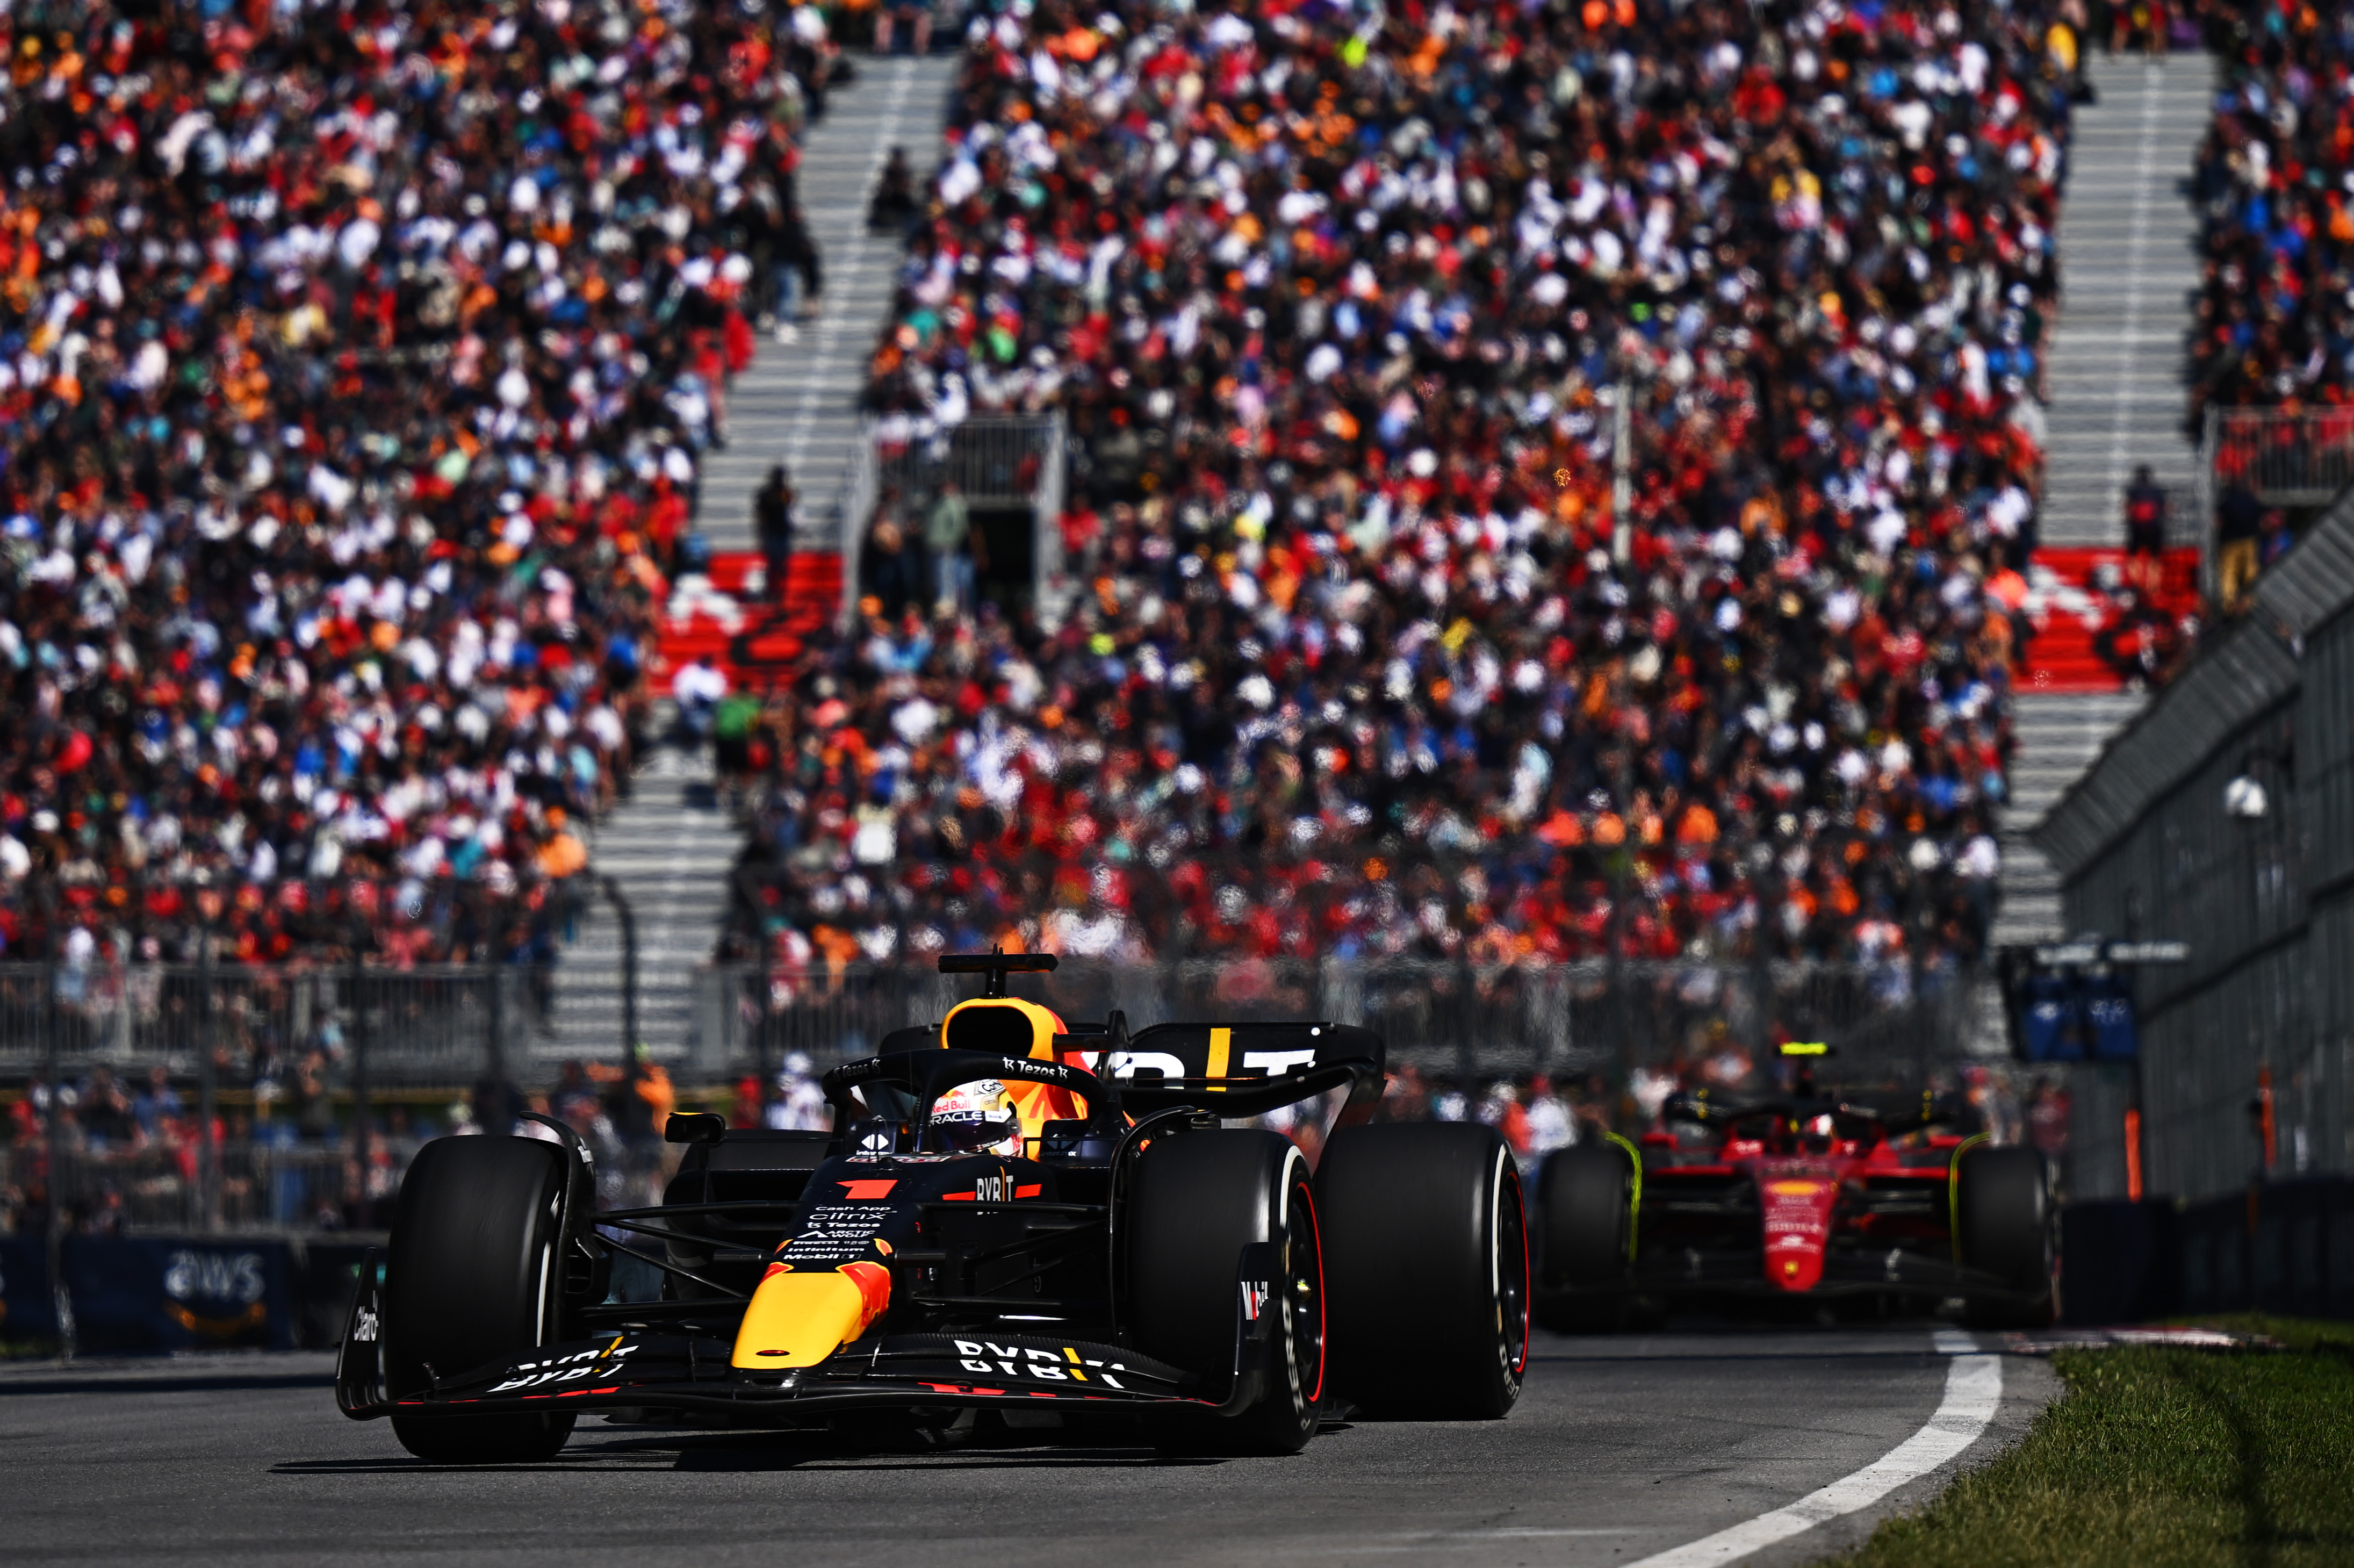 Max Verstappen leads Carlos Sainz during the Canadian Grand Prix in Montreal. Photo: Clive Mason